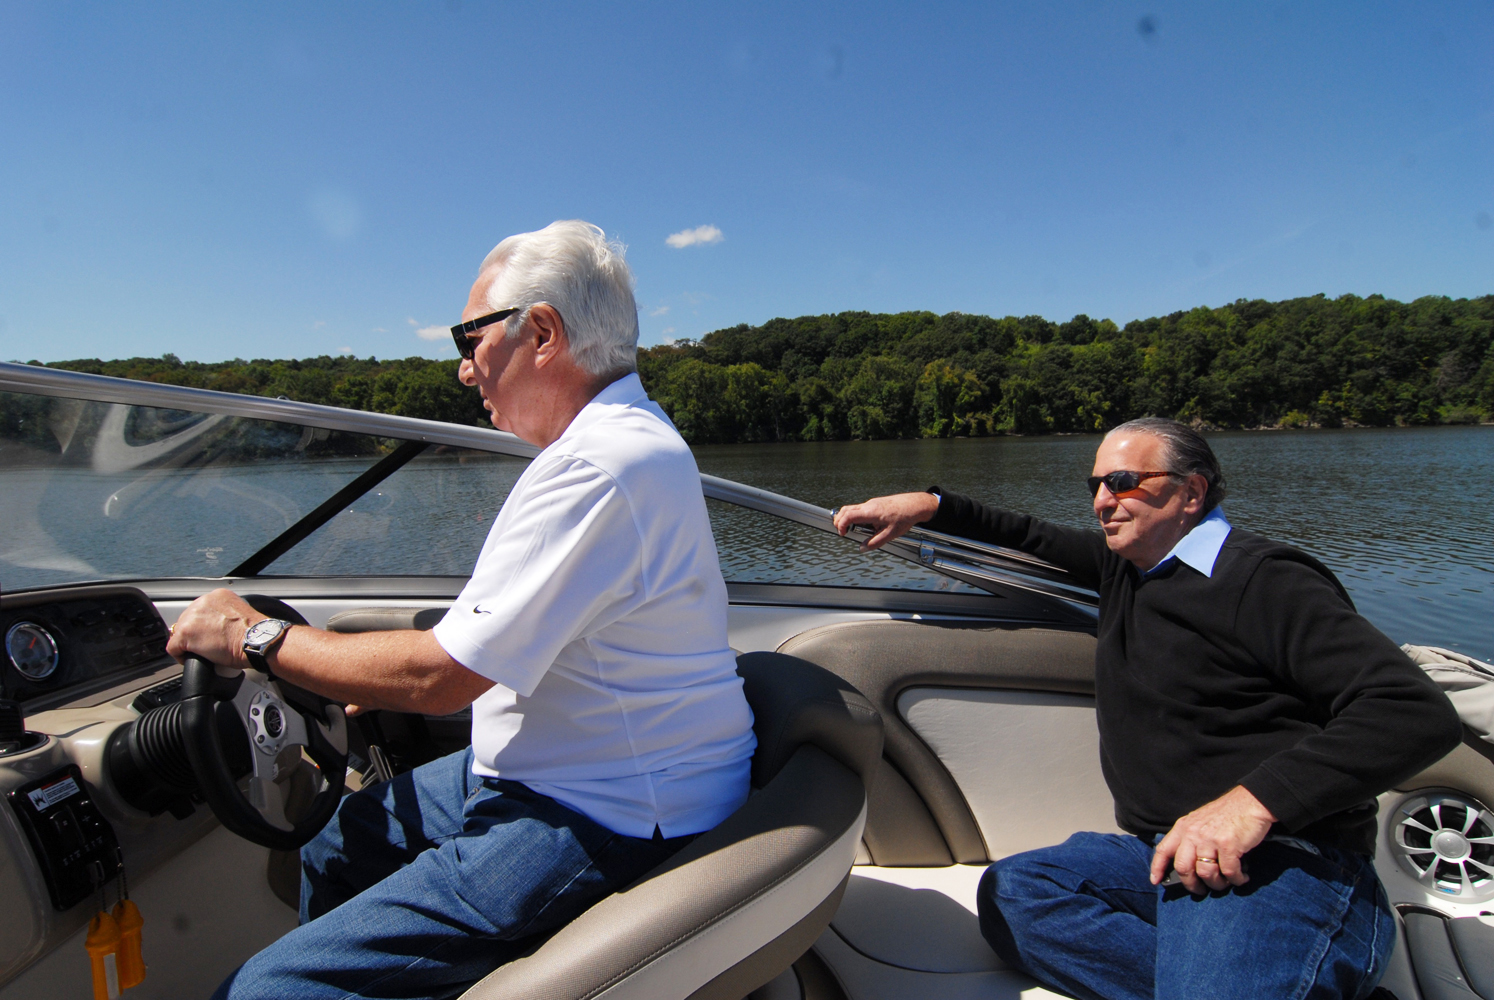 Alan Gosule (at the wheel) with Jon in back enjoying the ride on Alan's boat on the Hudson River in 2014.